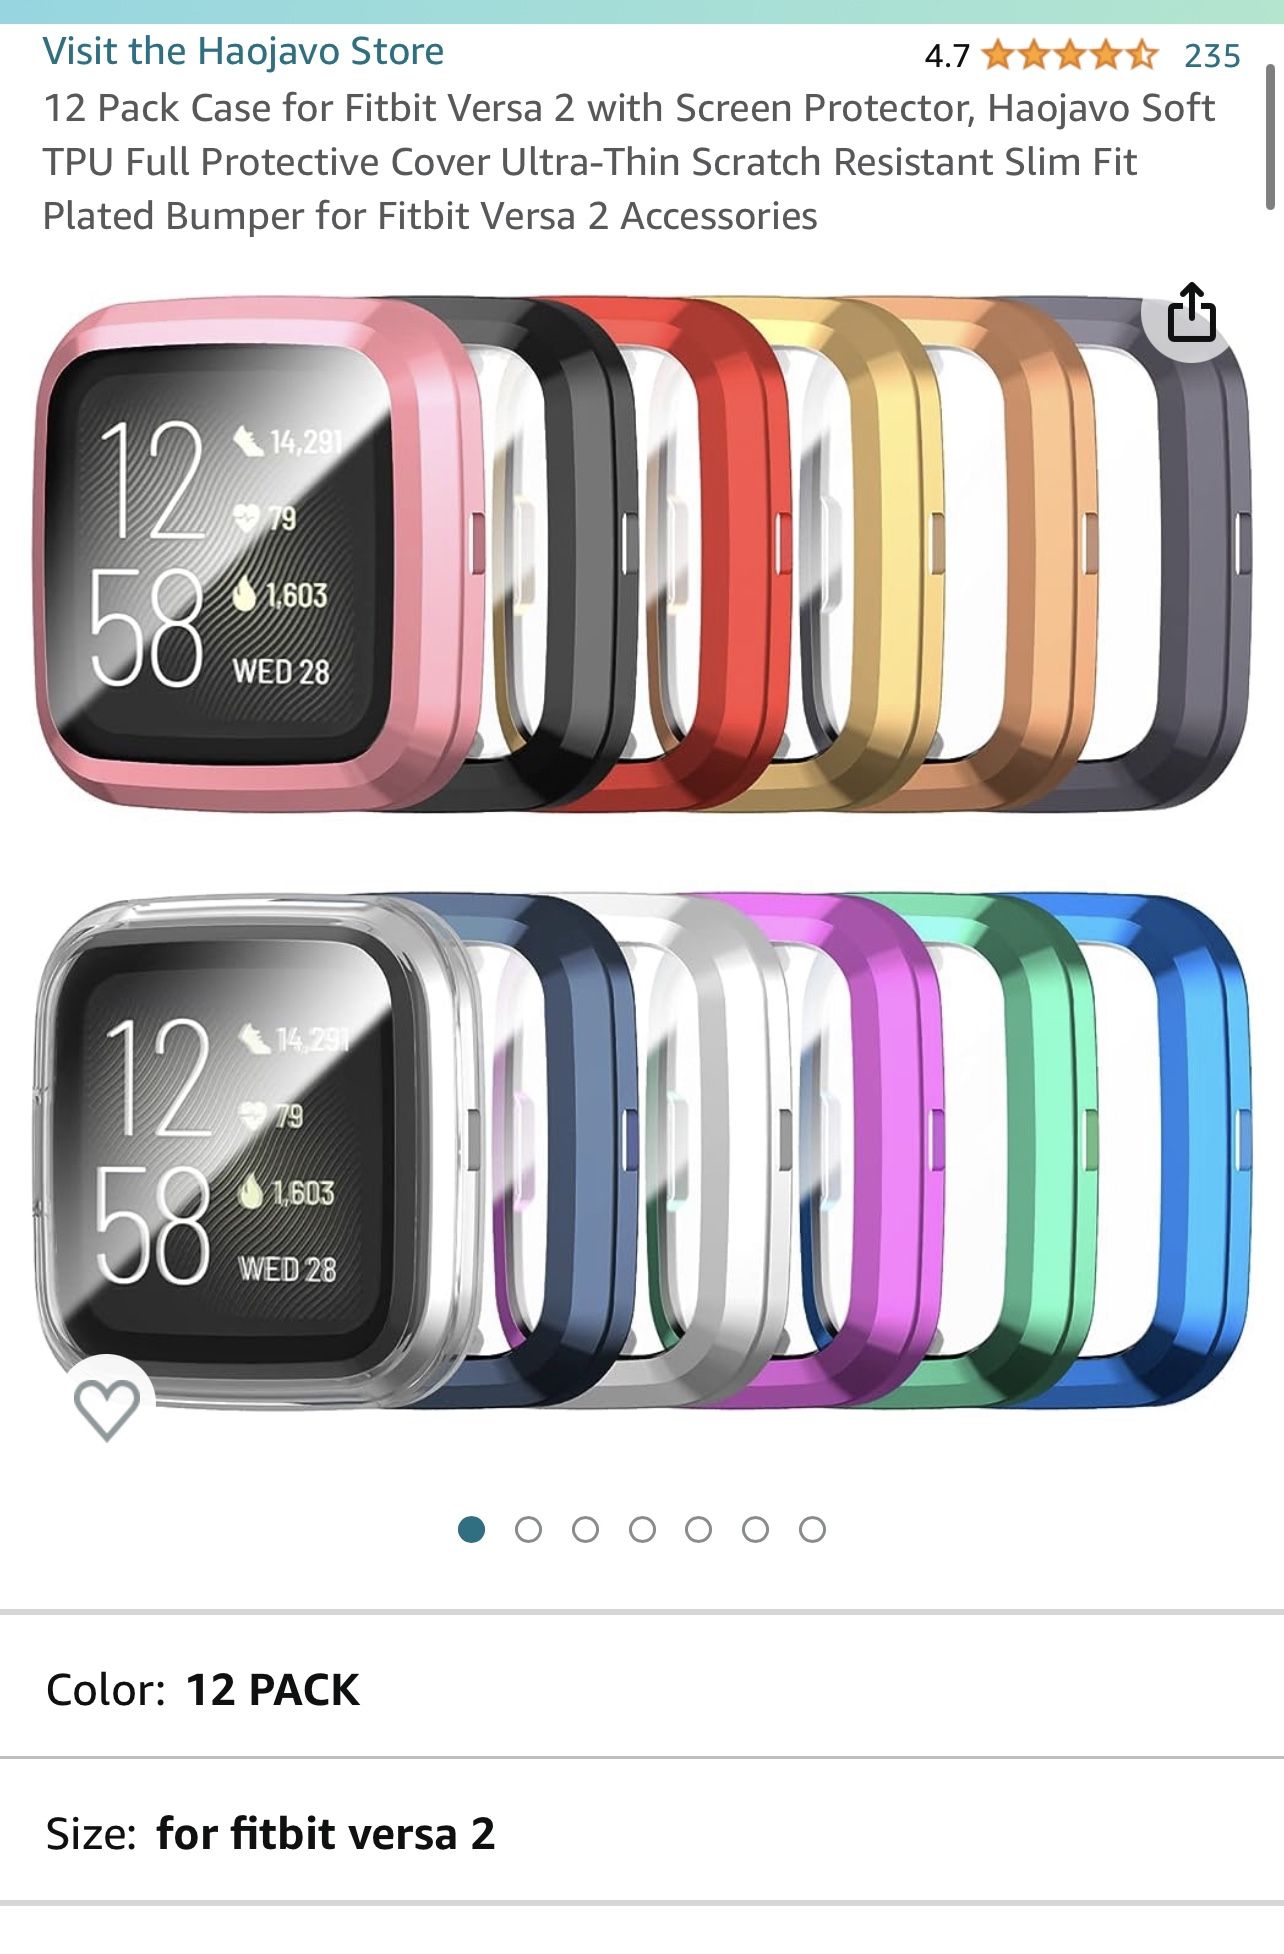 FitBit Versa 2 Watch Covers